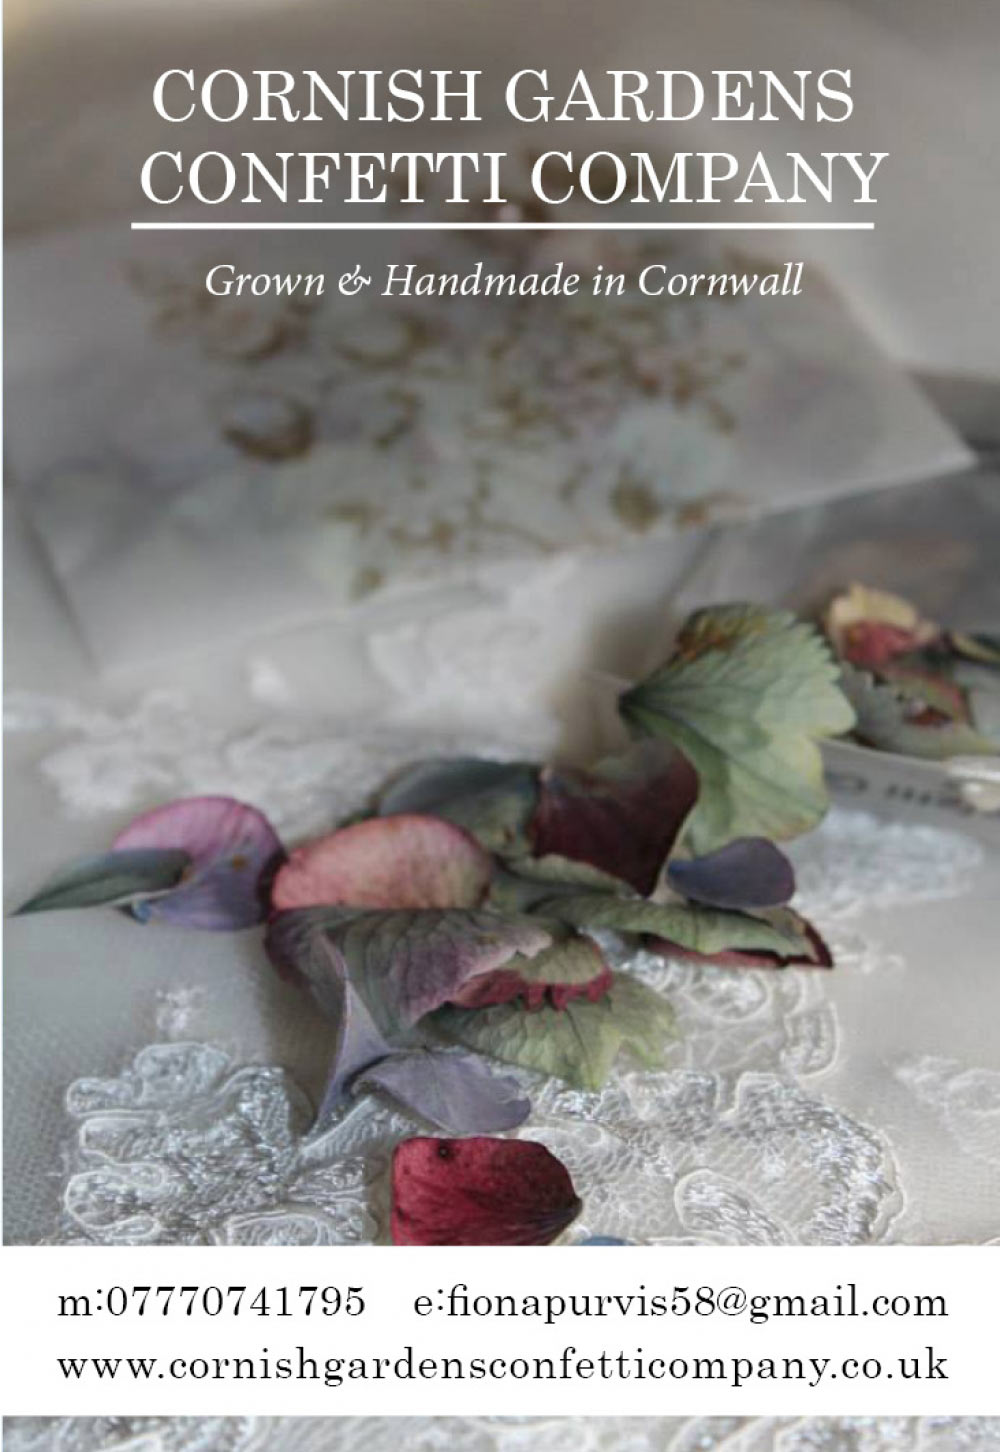 Cornish Gardens Confetti Co. goodies at The Wed Show!